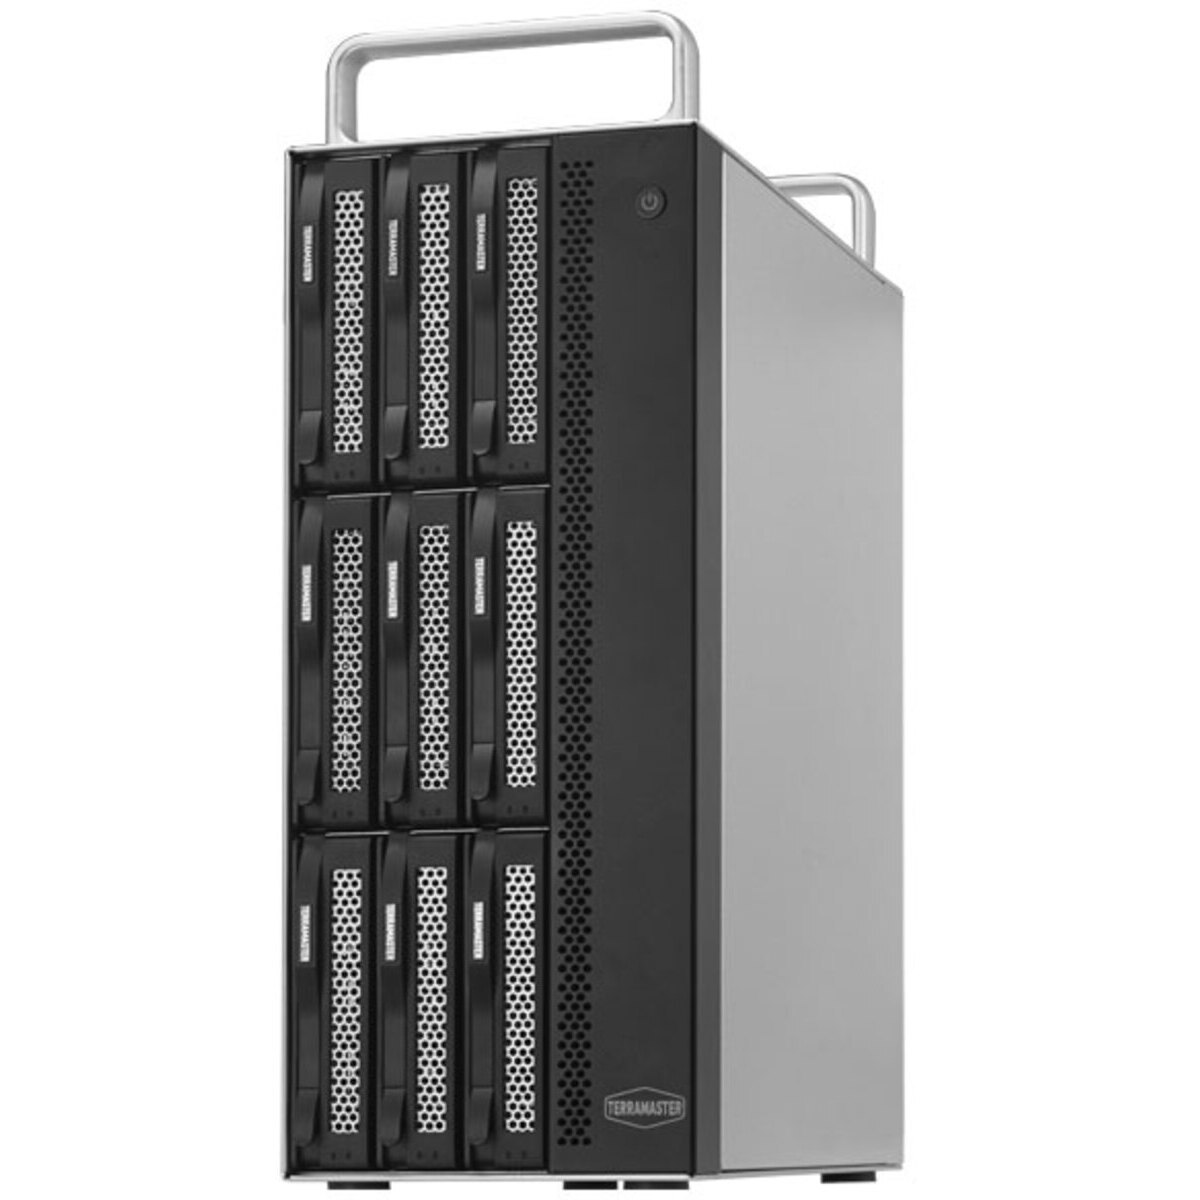 TerraMaster D8-322 108tb 8-Bay Desktop Multimedia / Power User / Business DAS - Direct Attached Storage Device 6x18tb Western Digital Ultrastar DC HC550 WUH721818ALE6L4 3.5 7200rpm SATA 6Gb/s HDD ENTERPRISE Class Drives Installed - Burn-In Tested D8-322